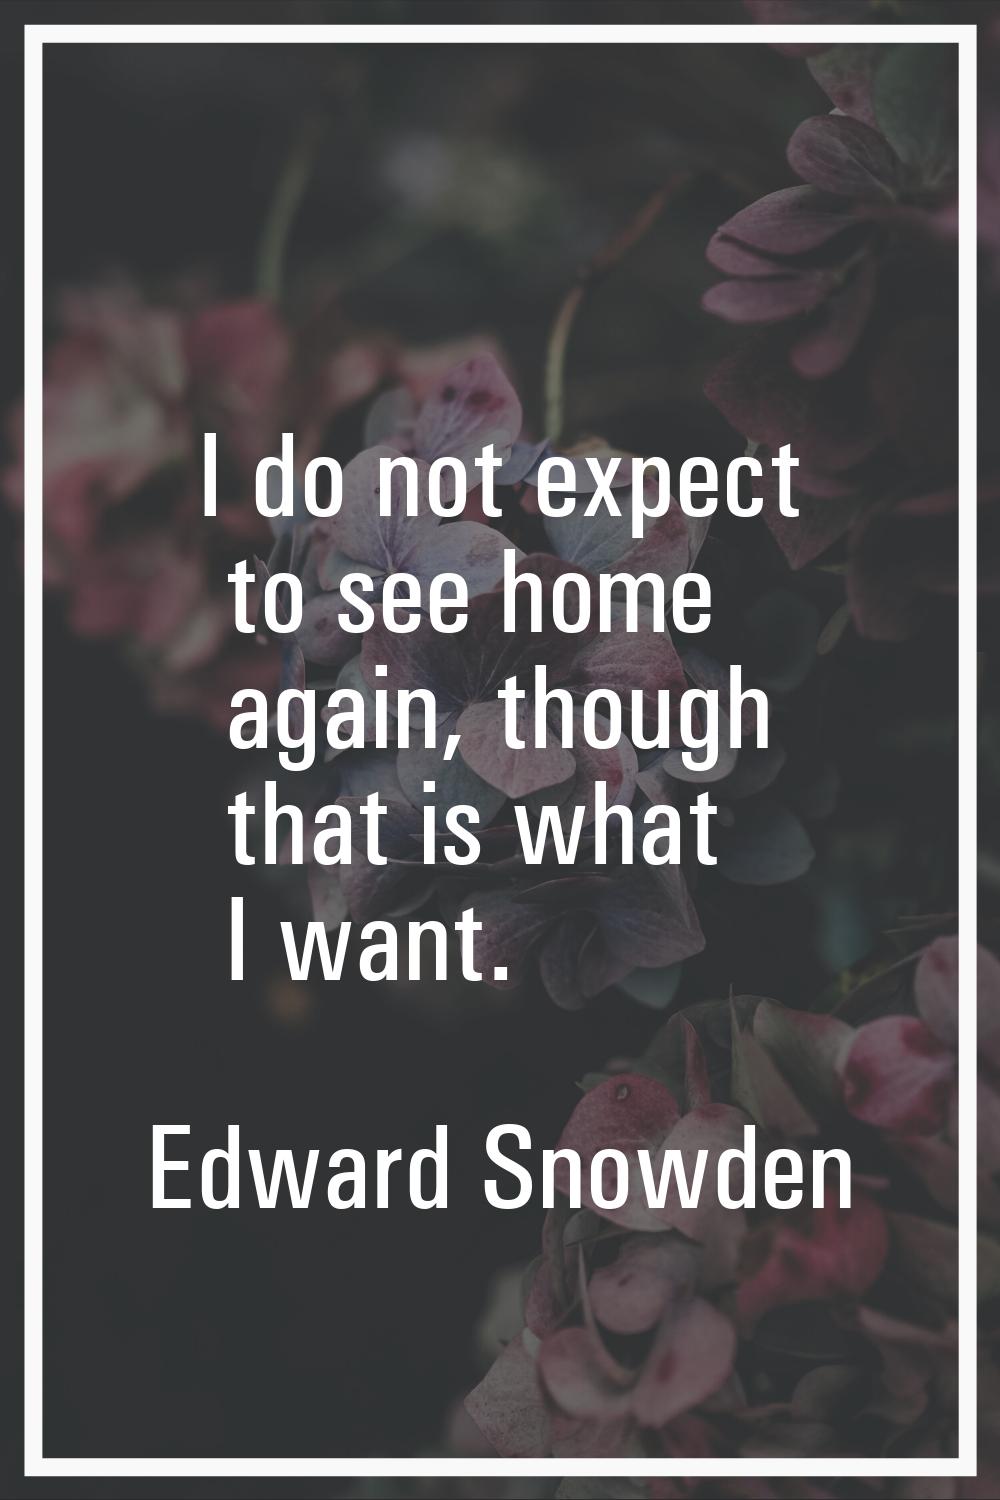 I do not expect to see home again, though that is what I want.